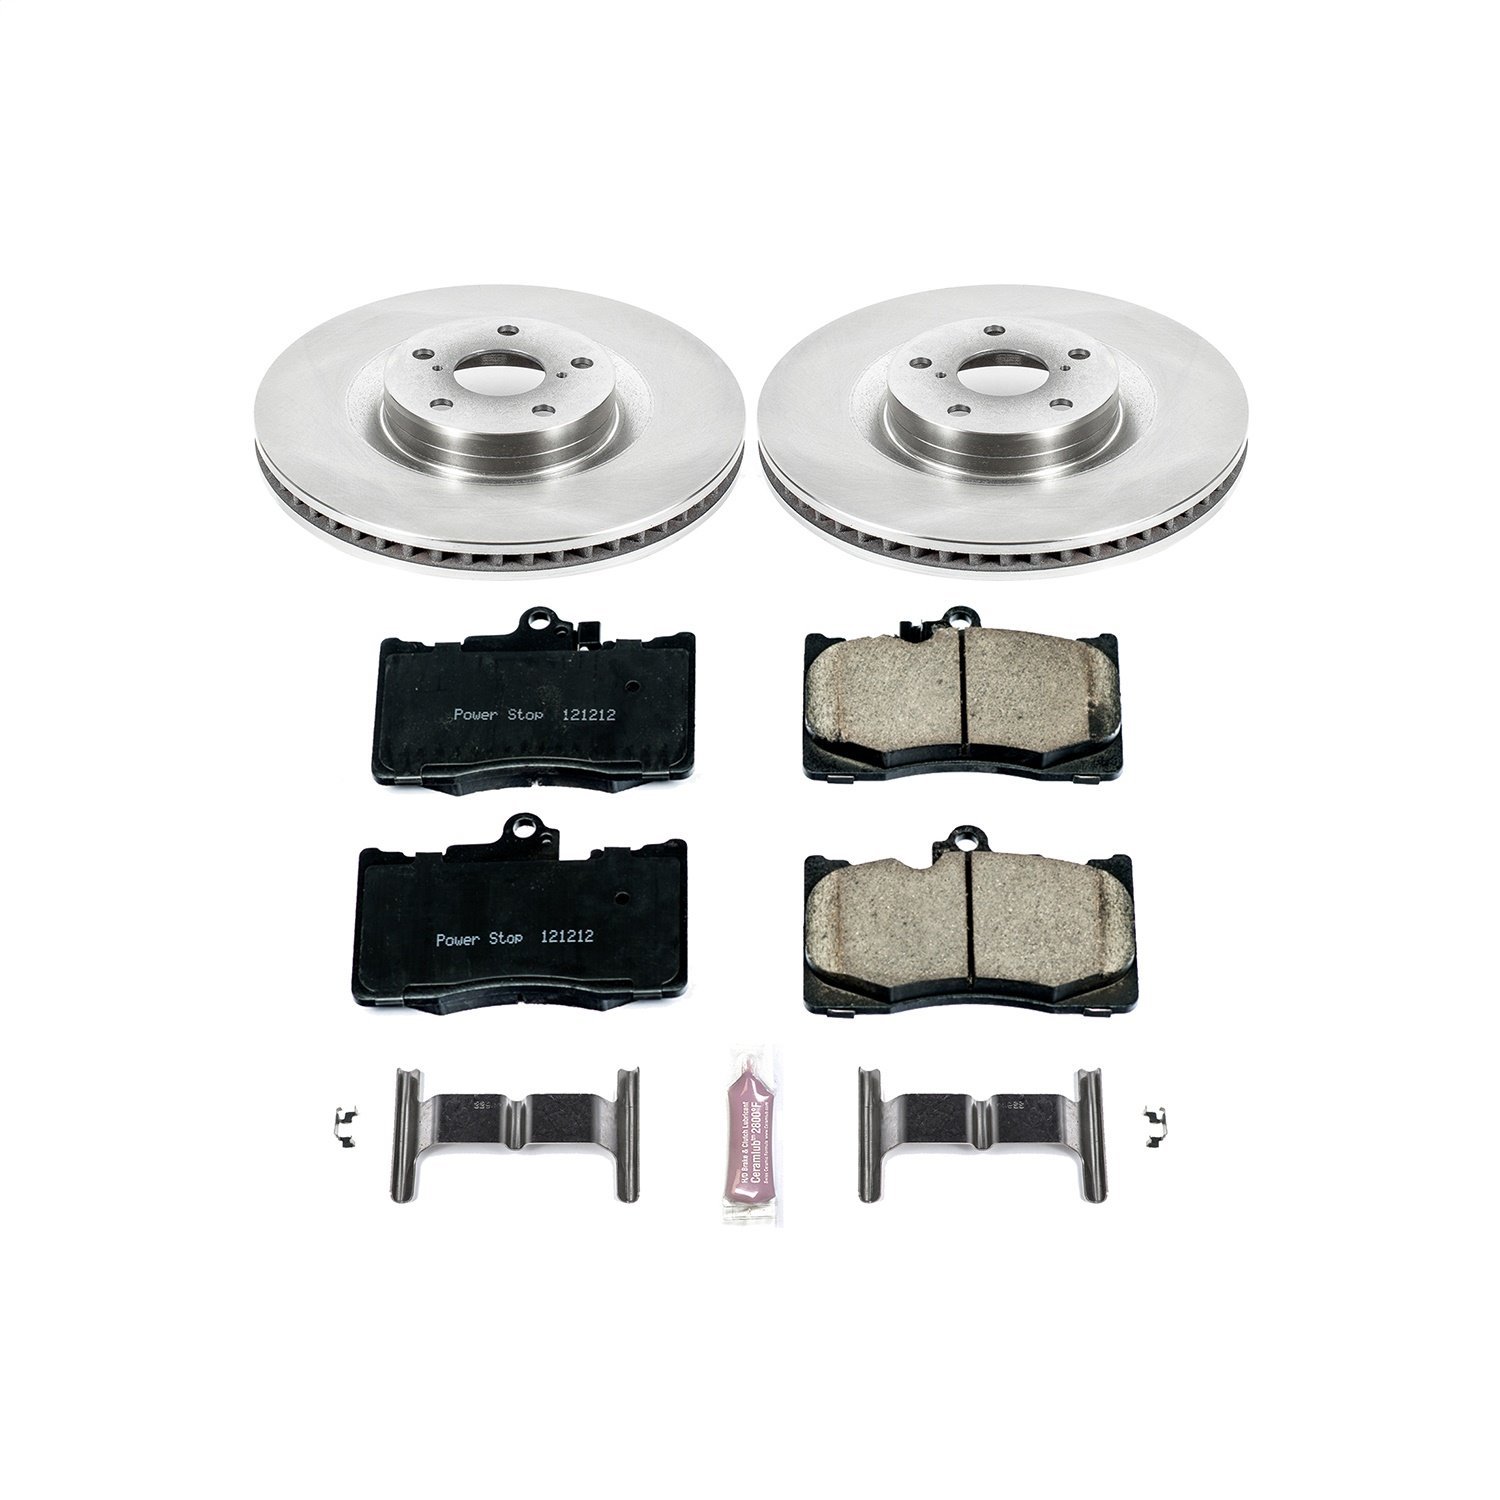 1-Click Daily Driver Brake Kits Front OE Replacement Rotors Z16 Ceramic Scorched Brake Pads